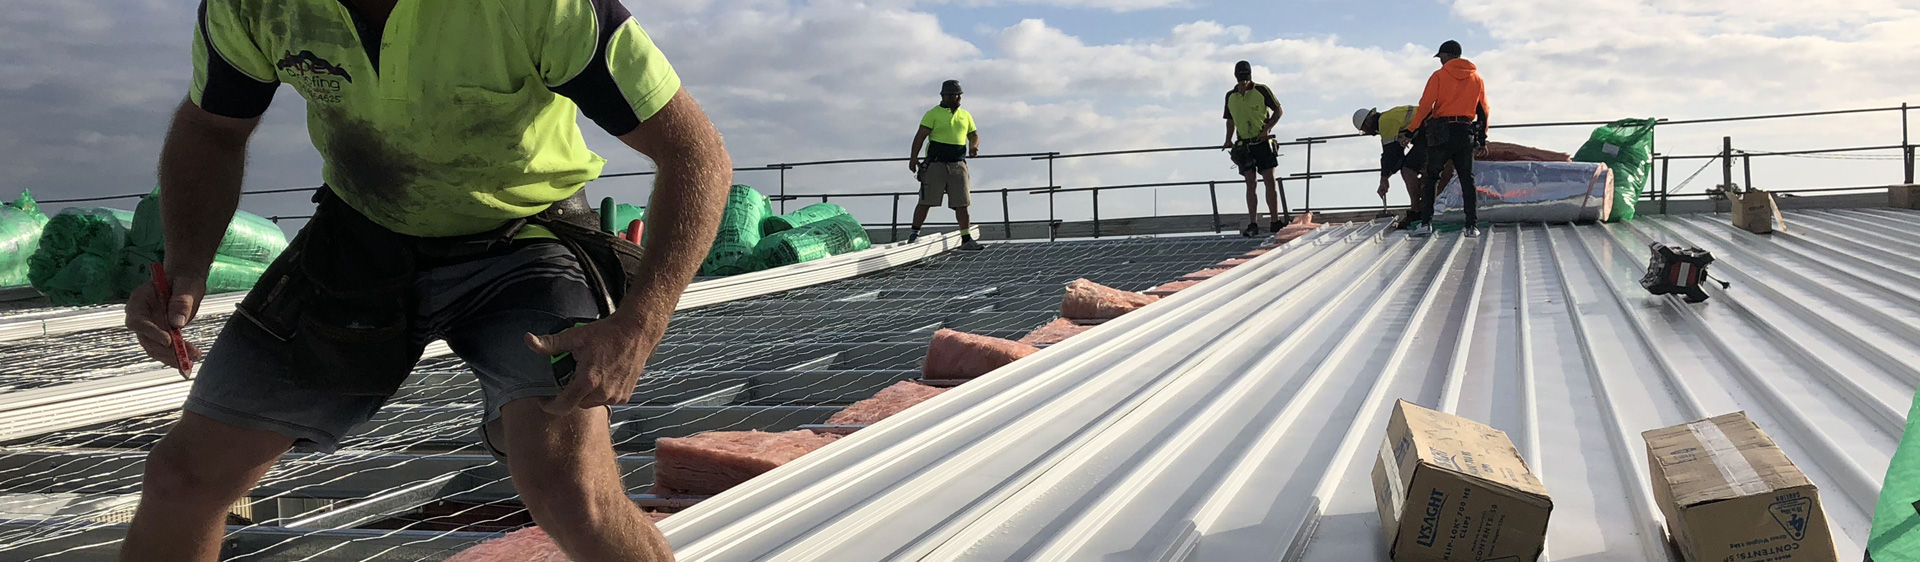 Re-roofing Sydney